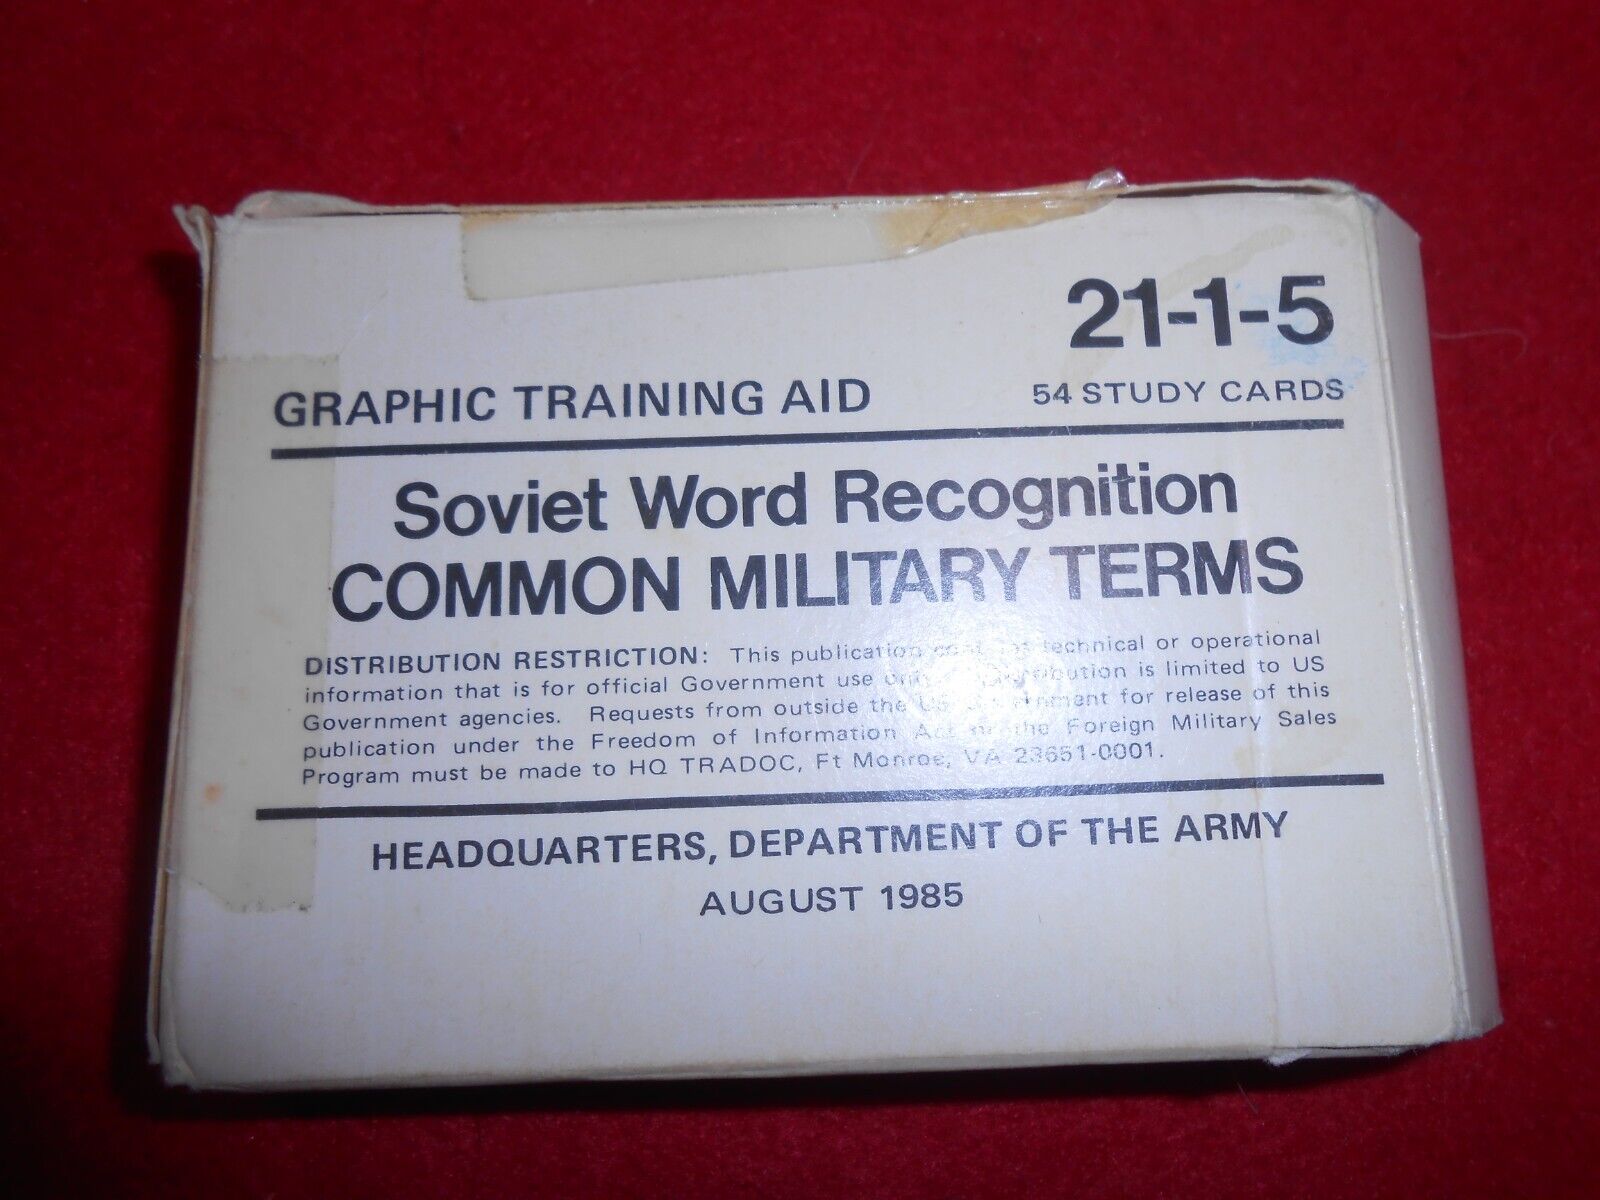 Graphic Training Aid 21-1-5,  Soviet Word Recognition common military terms